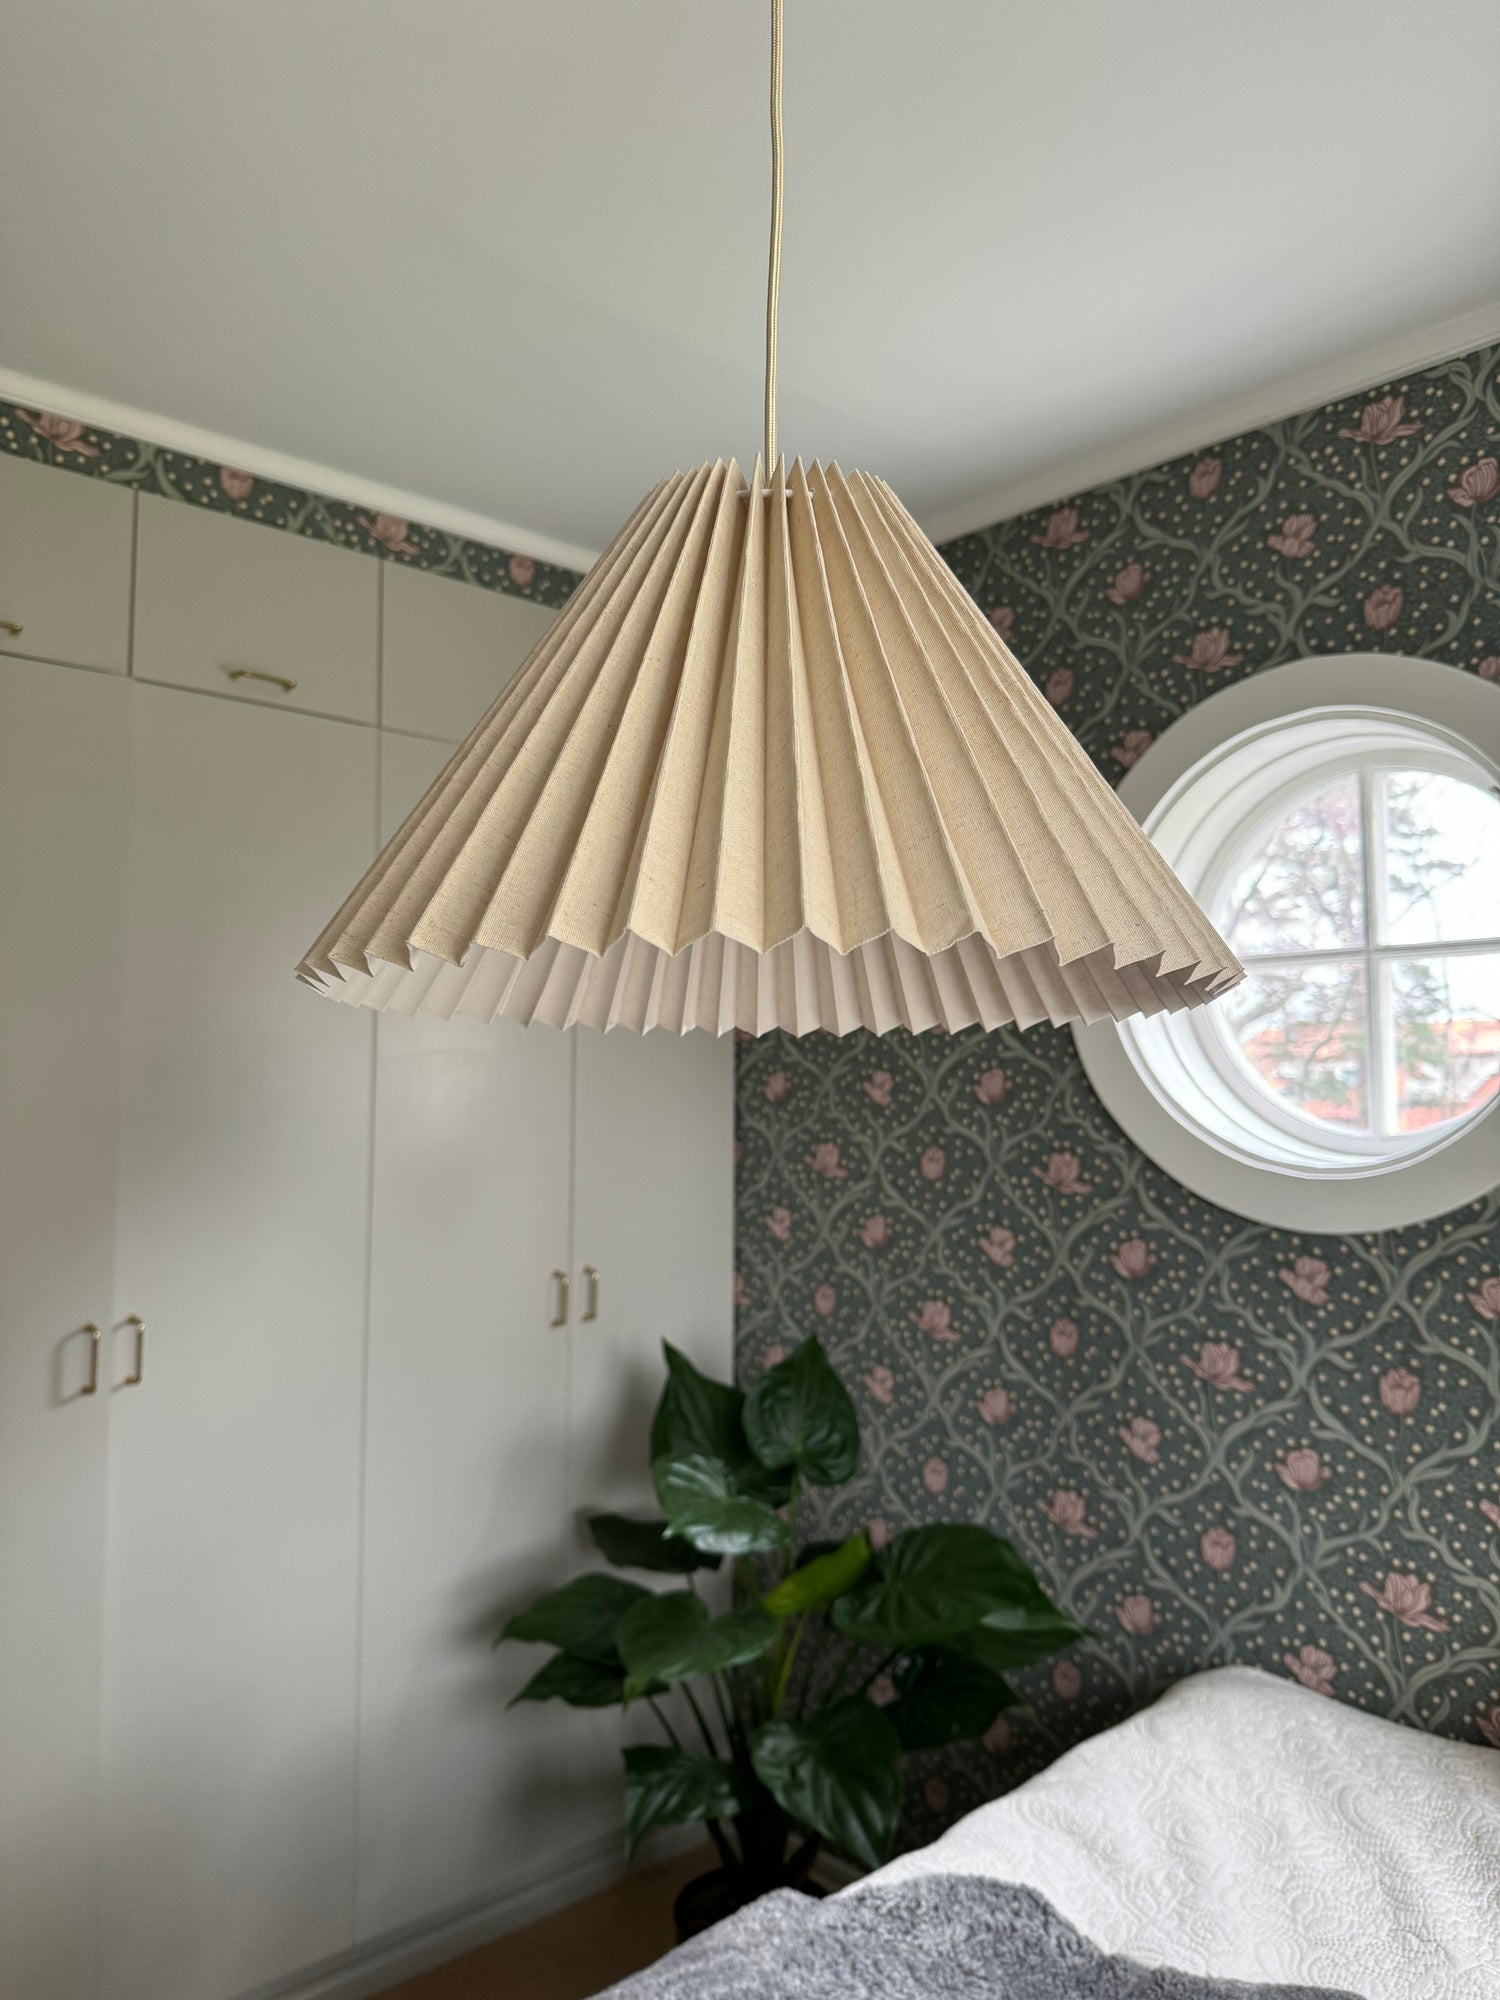 Pleated Lampshade Ceiling - Off White - 42 cm